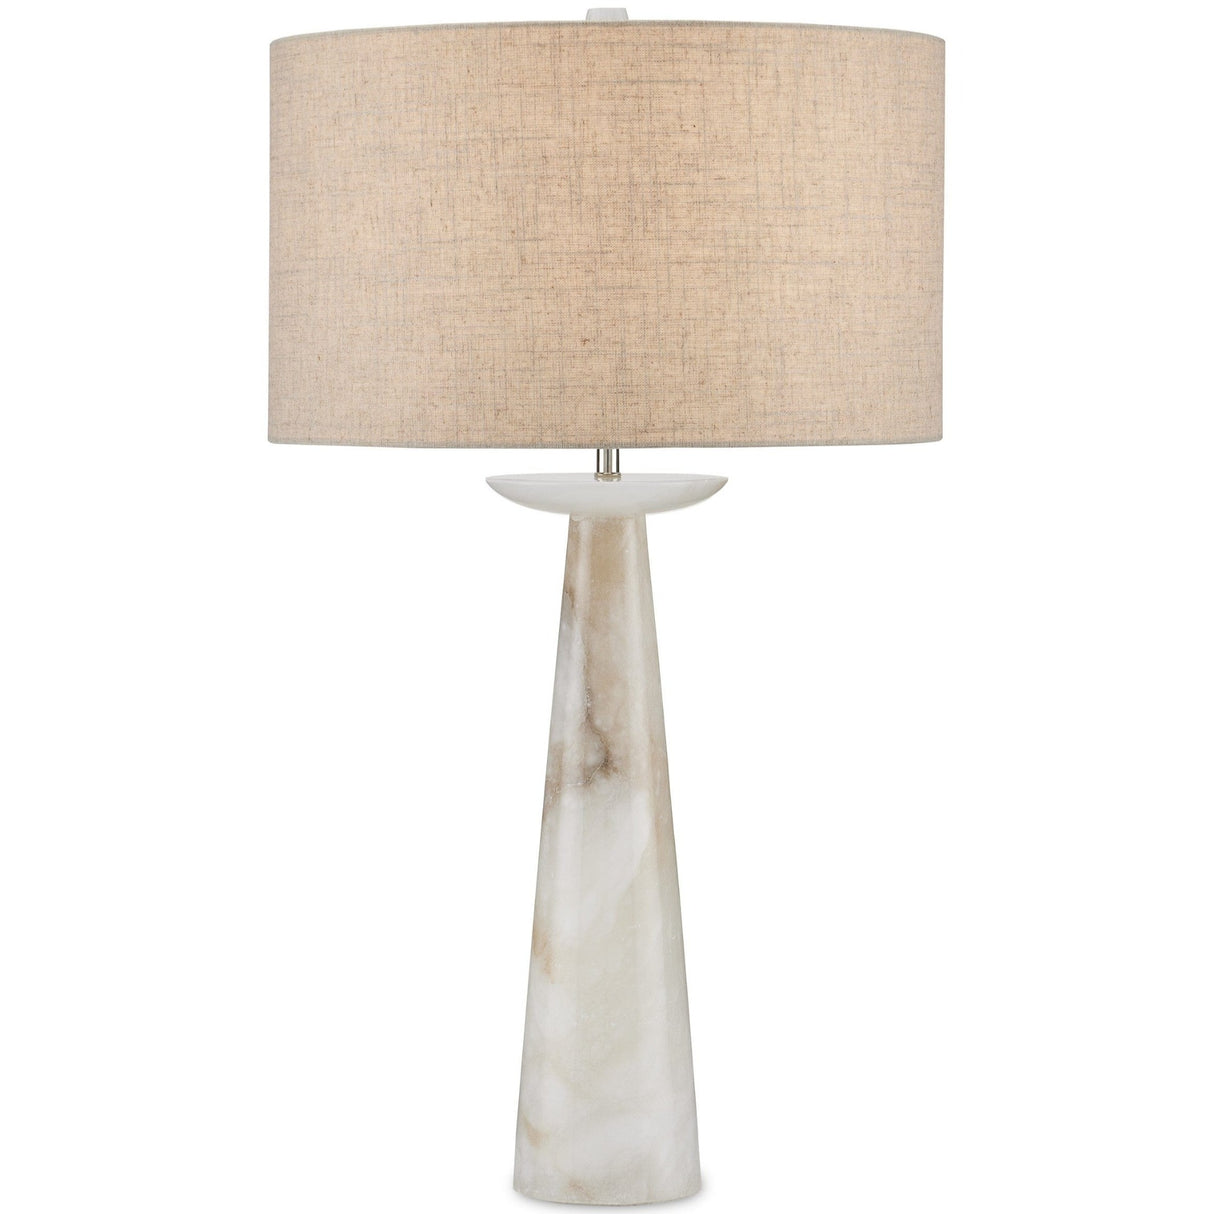 Currey and Company Pharos Table Lamp Table Lamps currey-co-6000-0892 633306053045